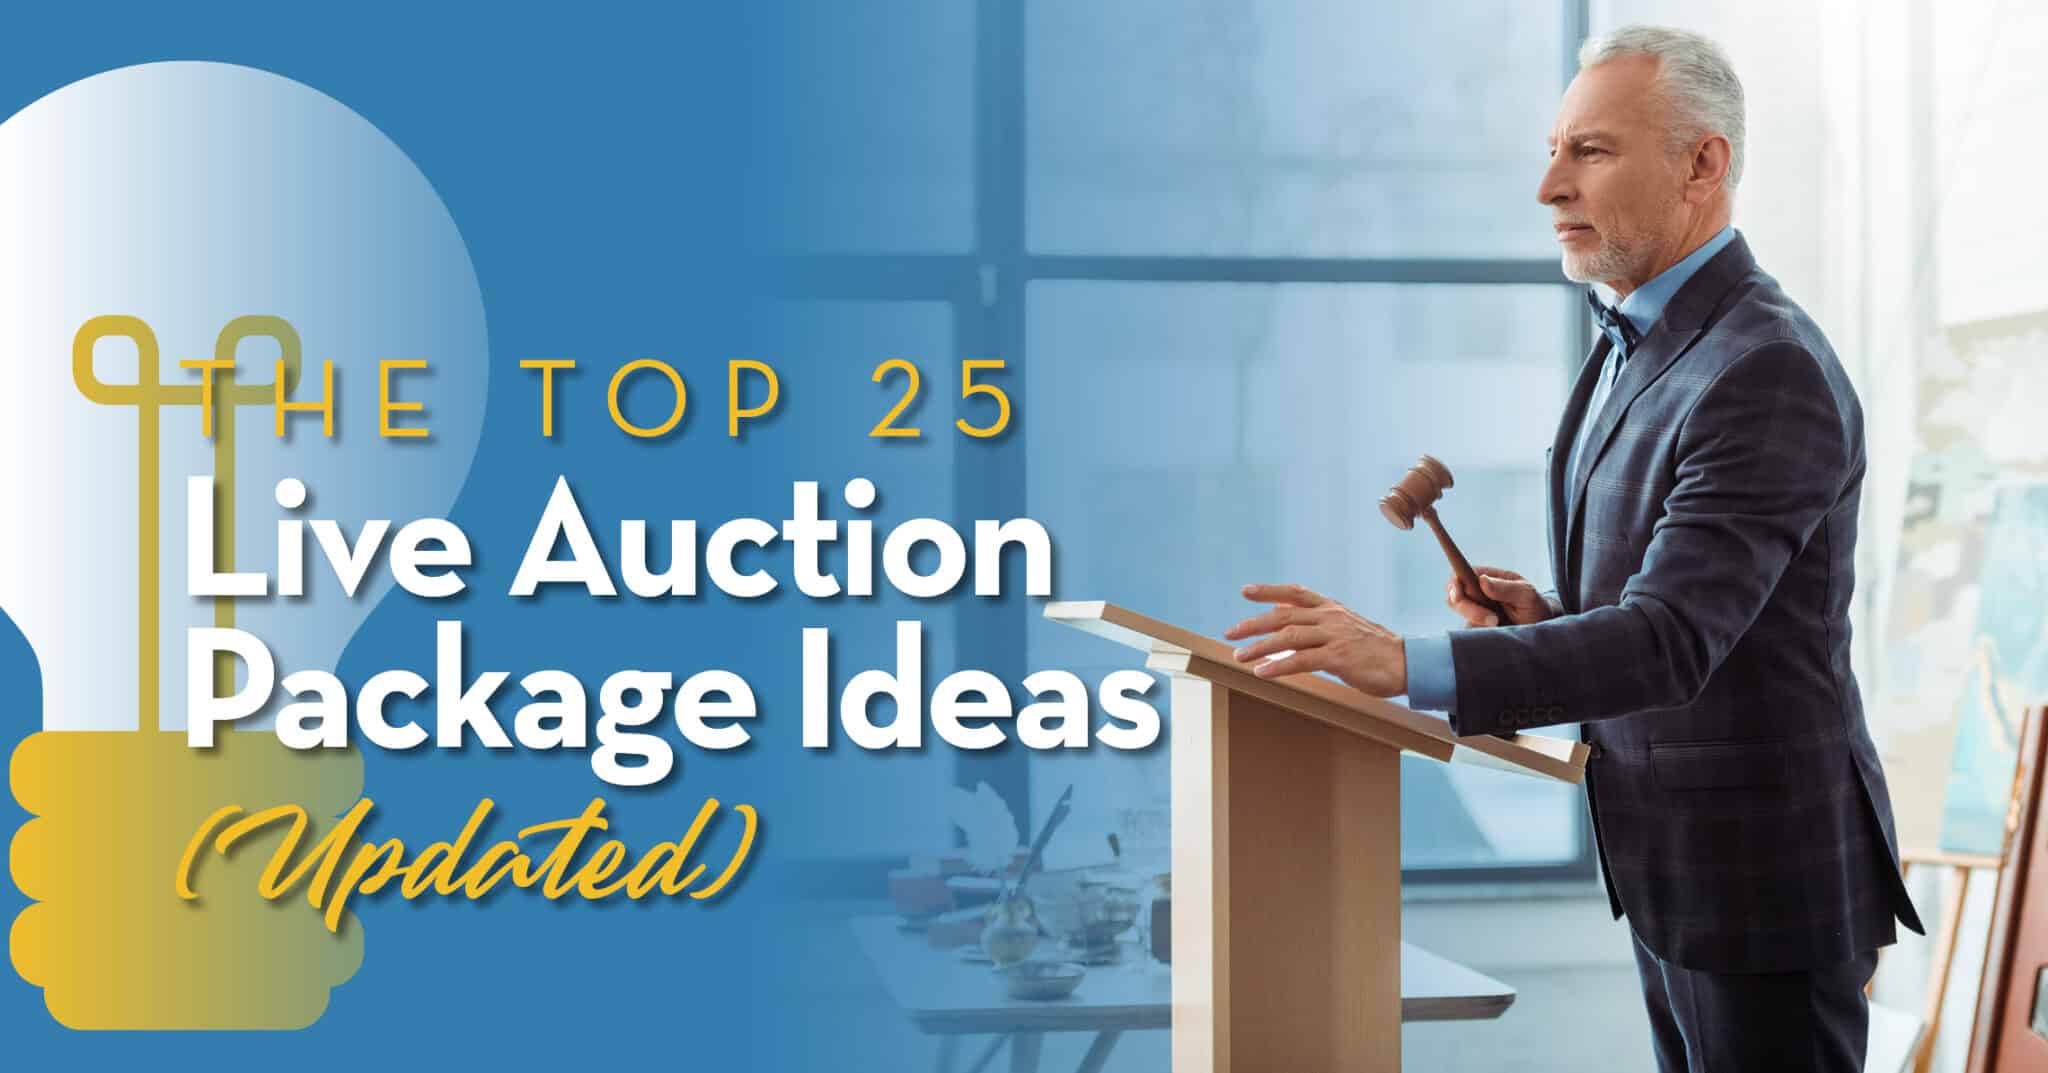 Local Charity Auctions – An Online Warehouse For Charitable Giving